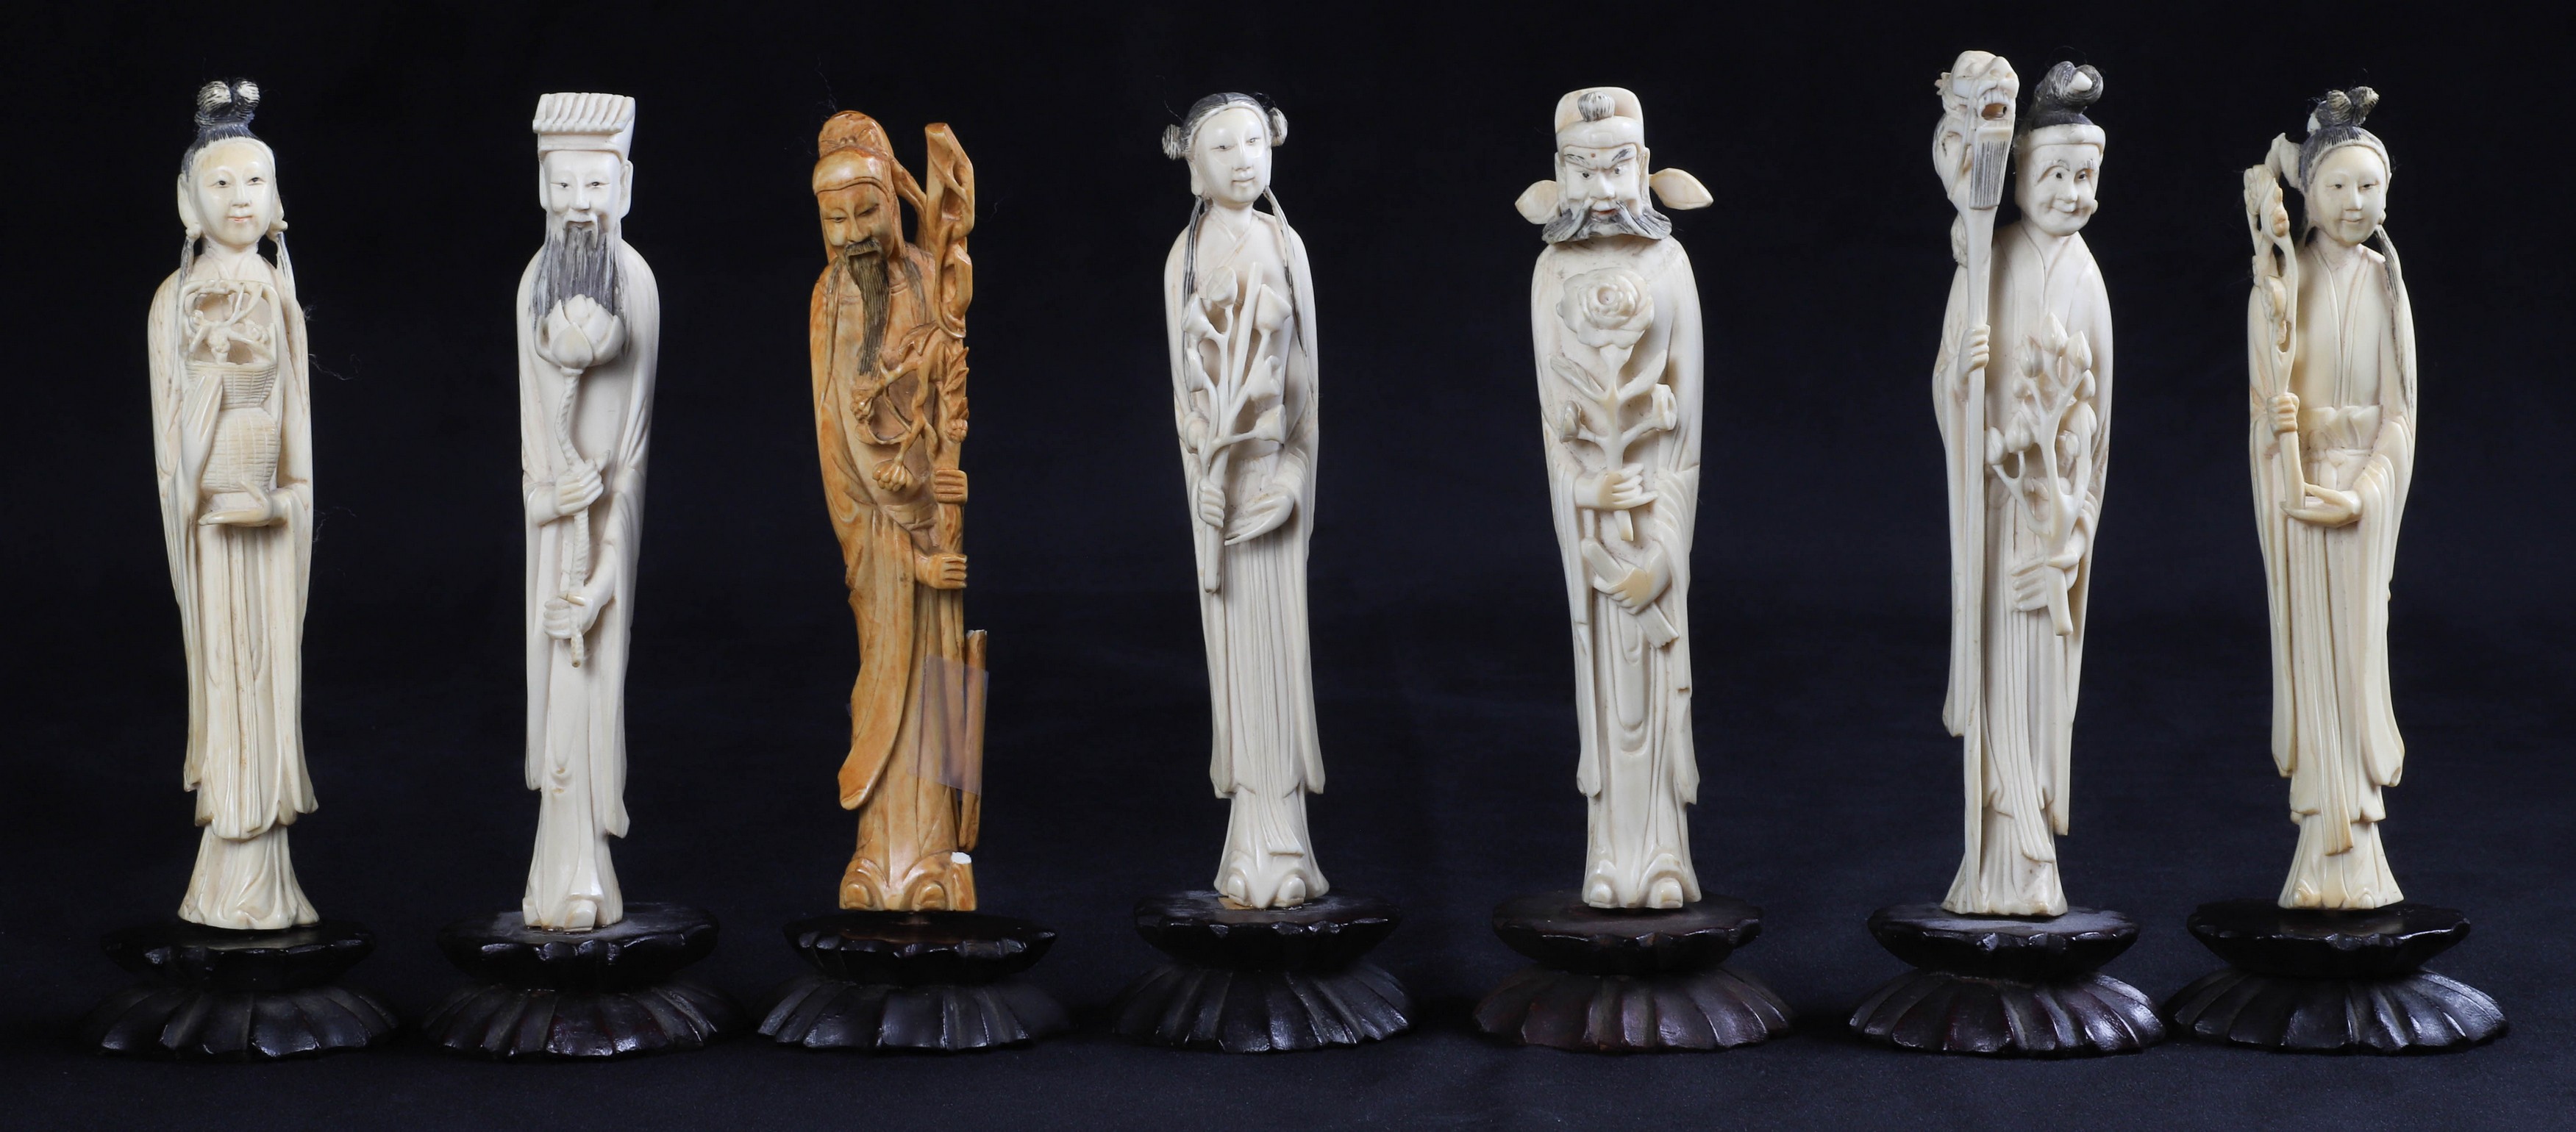  7 Ivory carved Chinese immortals  2e0d3a